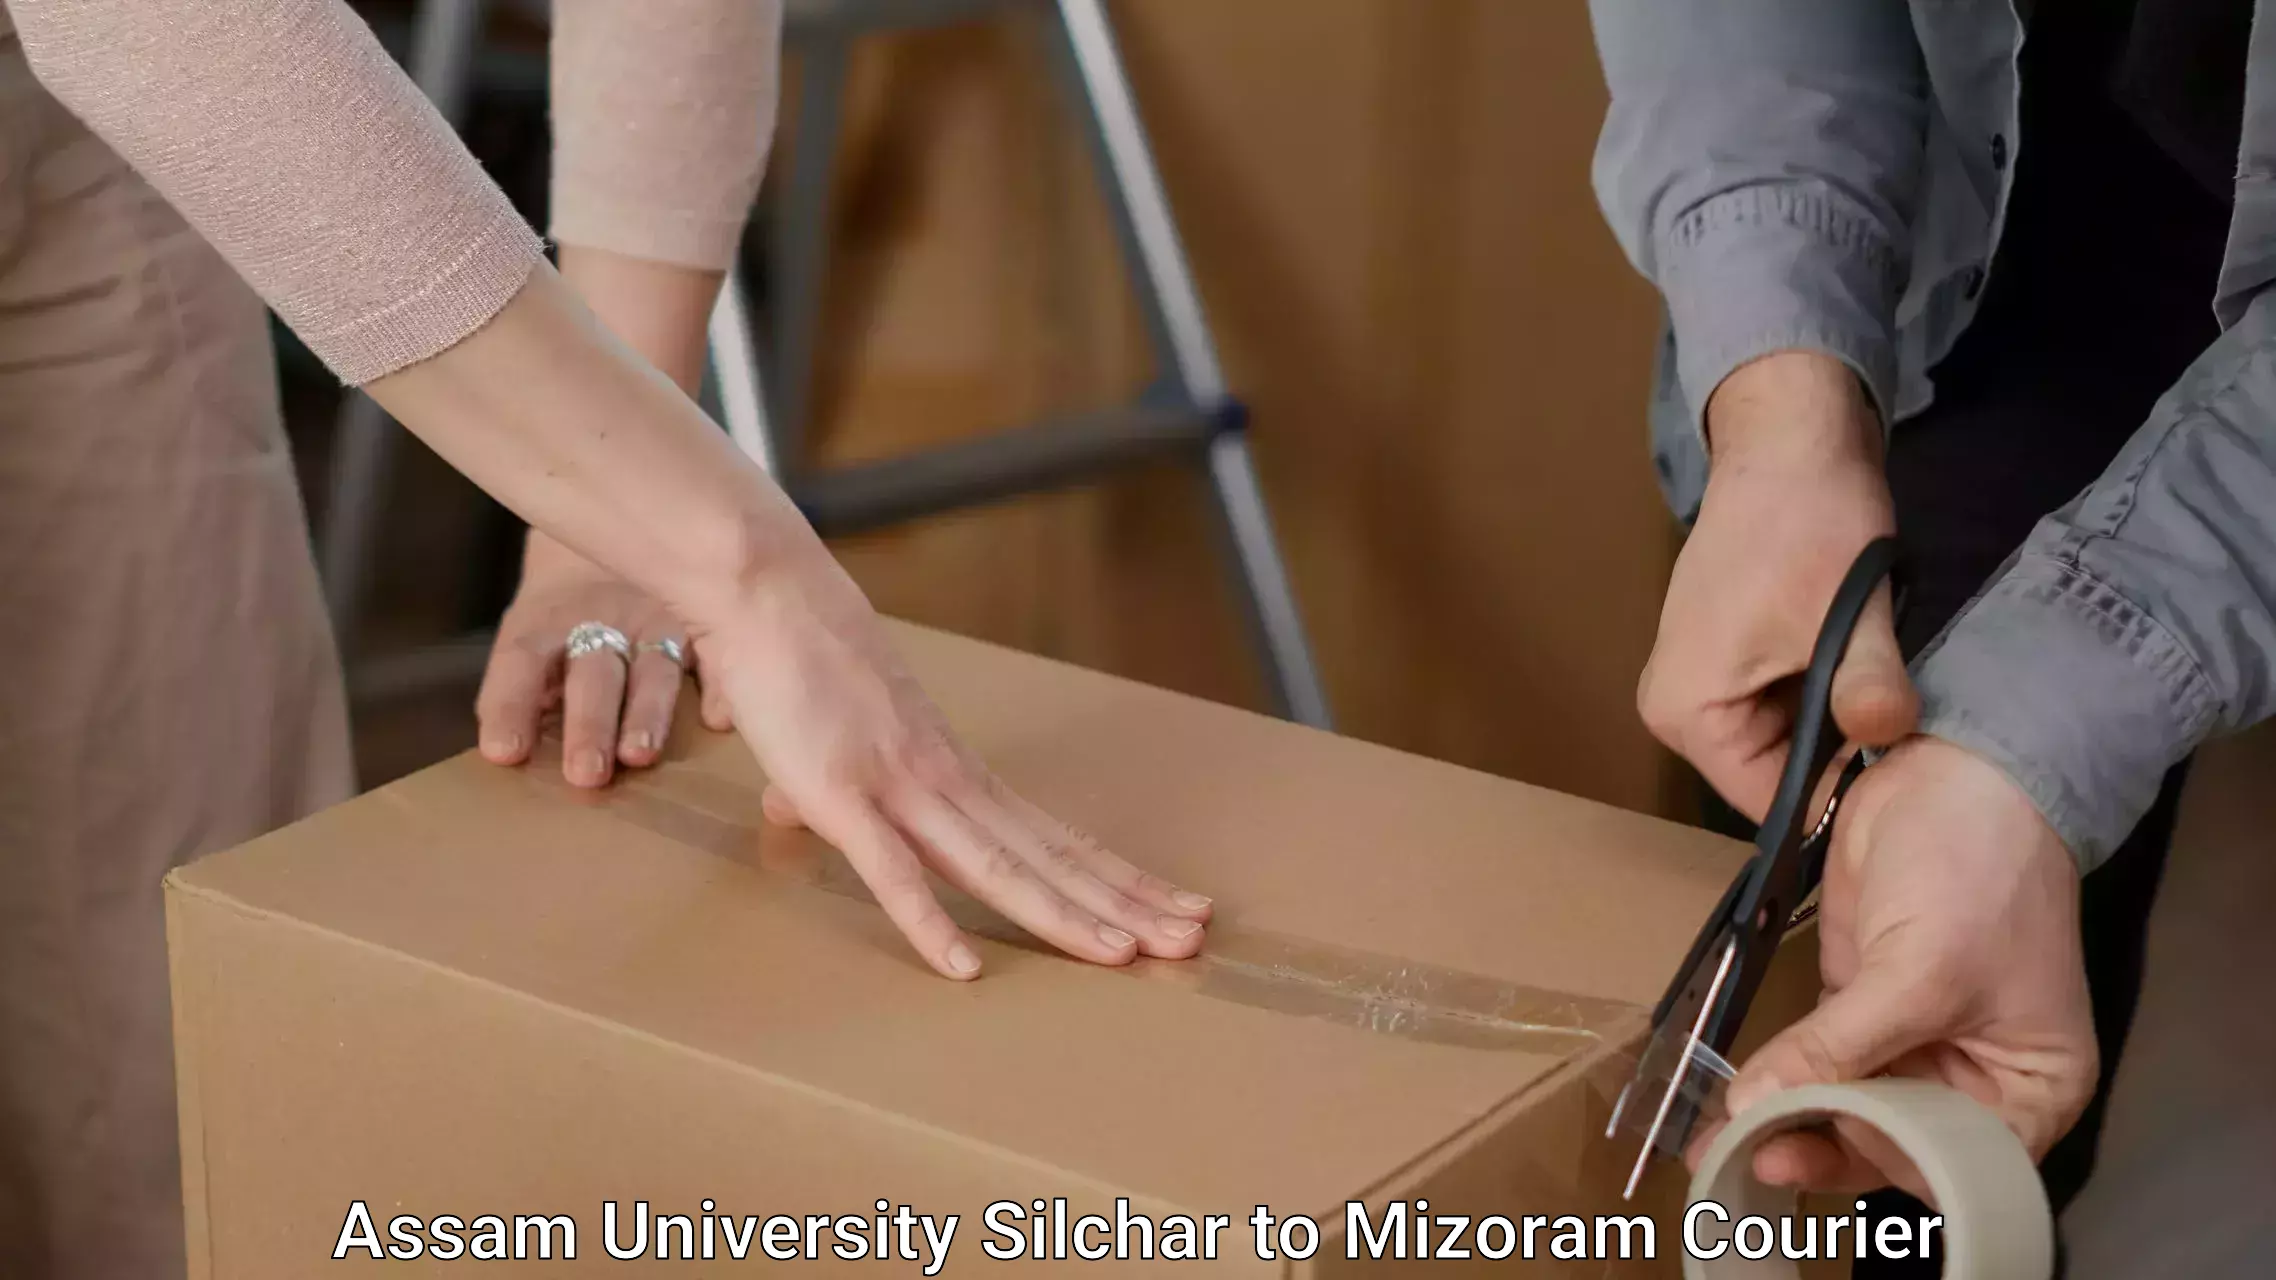 Efficient moving company Assam University Silchar to Lunglei